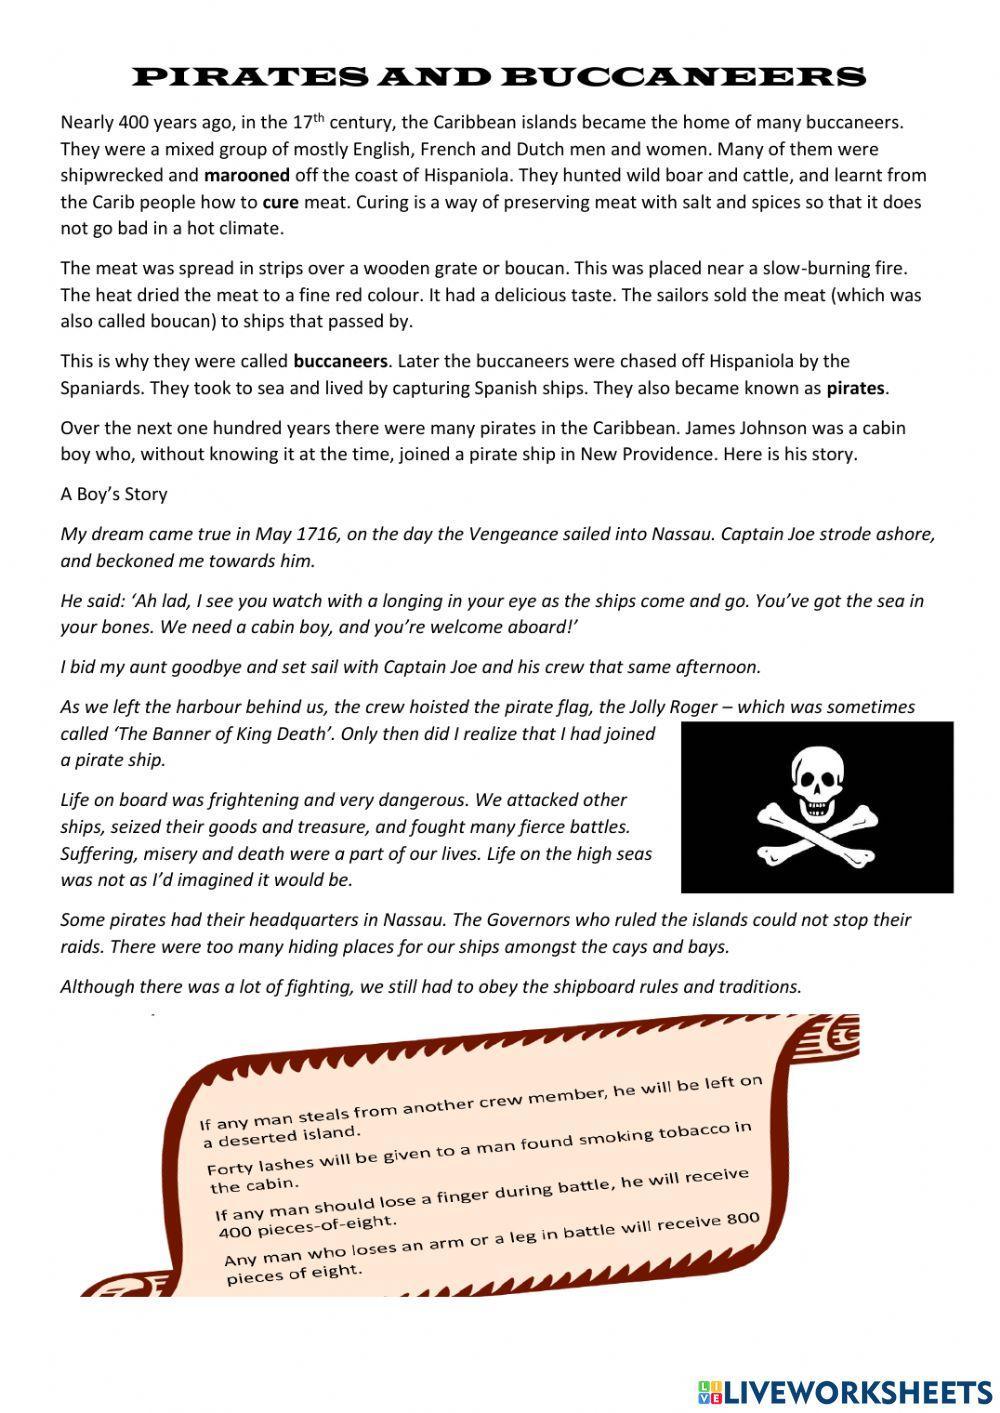 Pirates and buccaneers notes